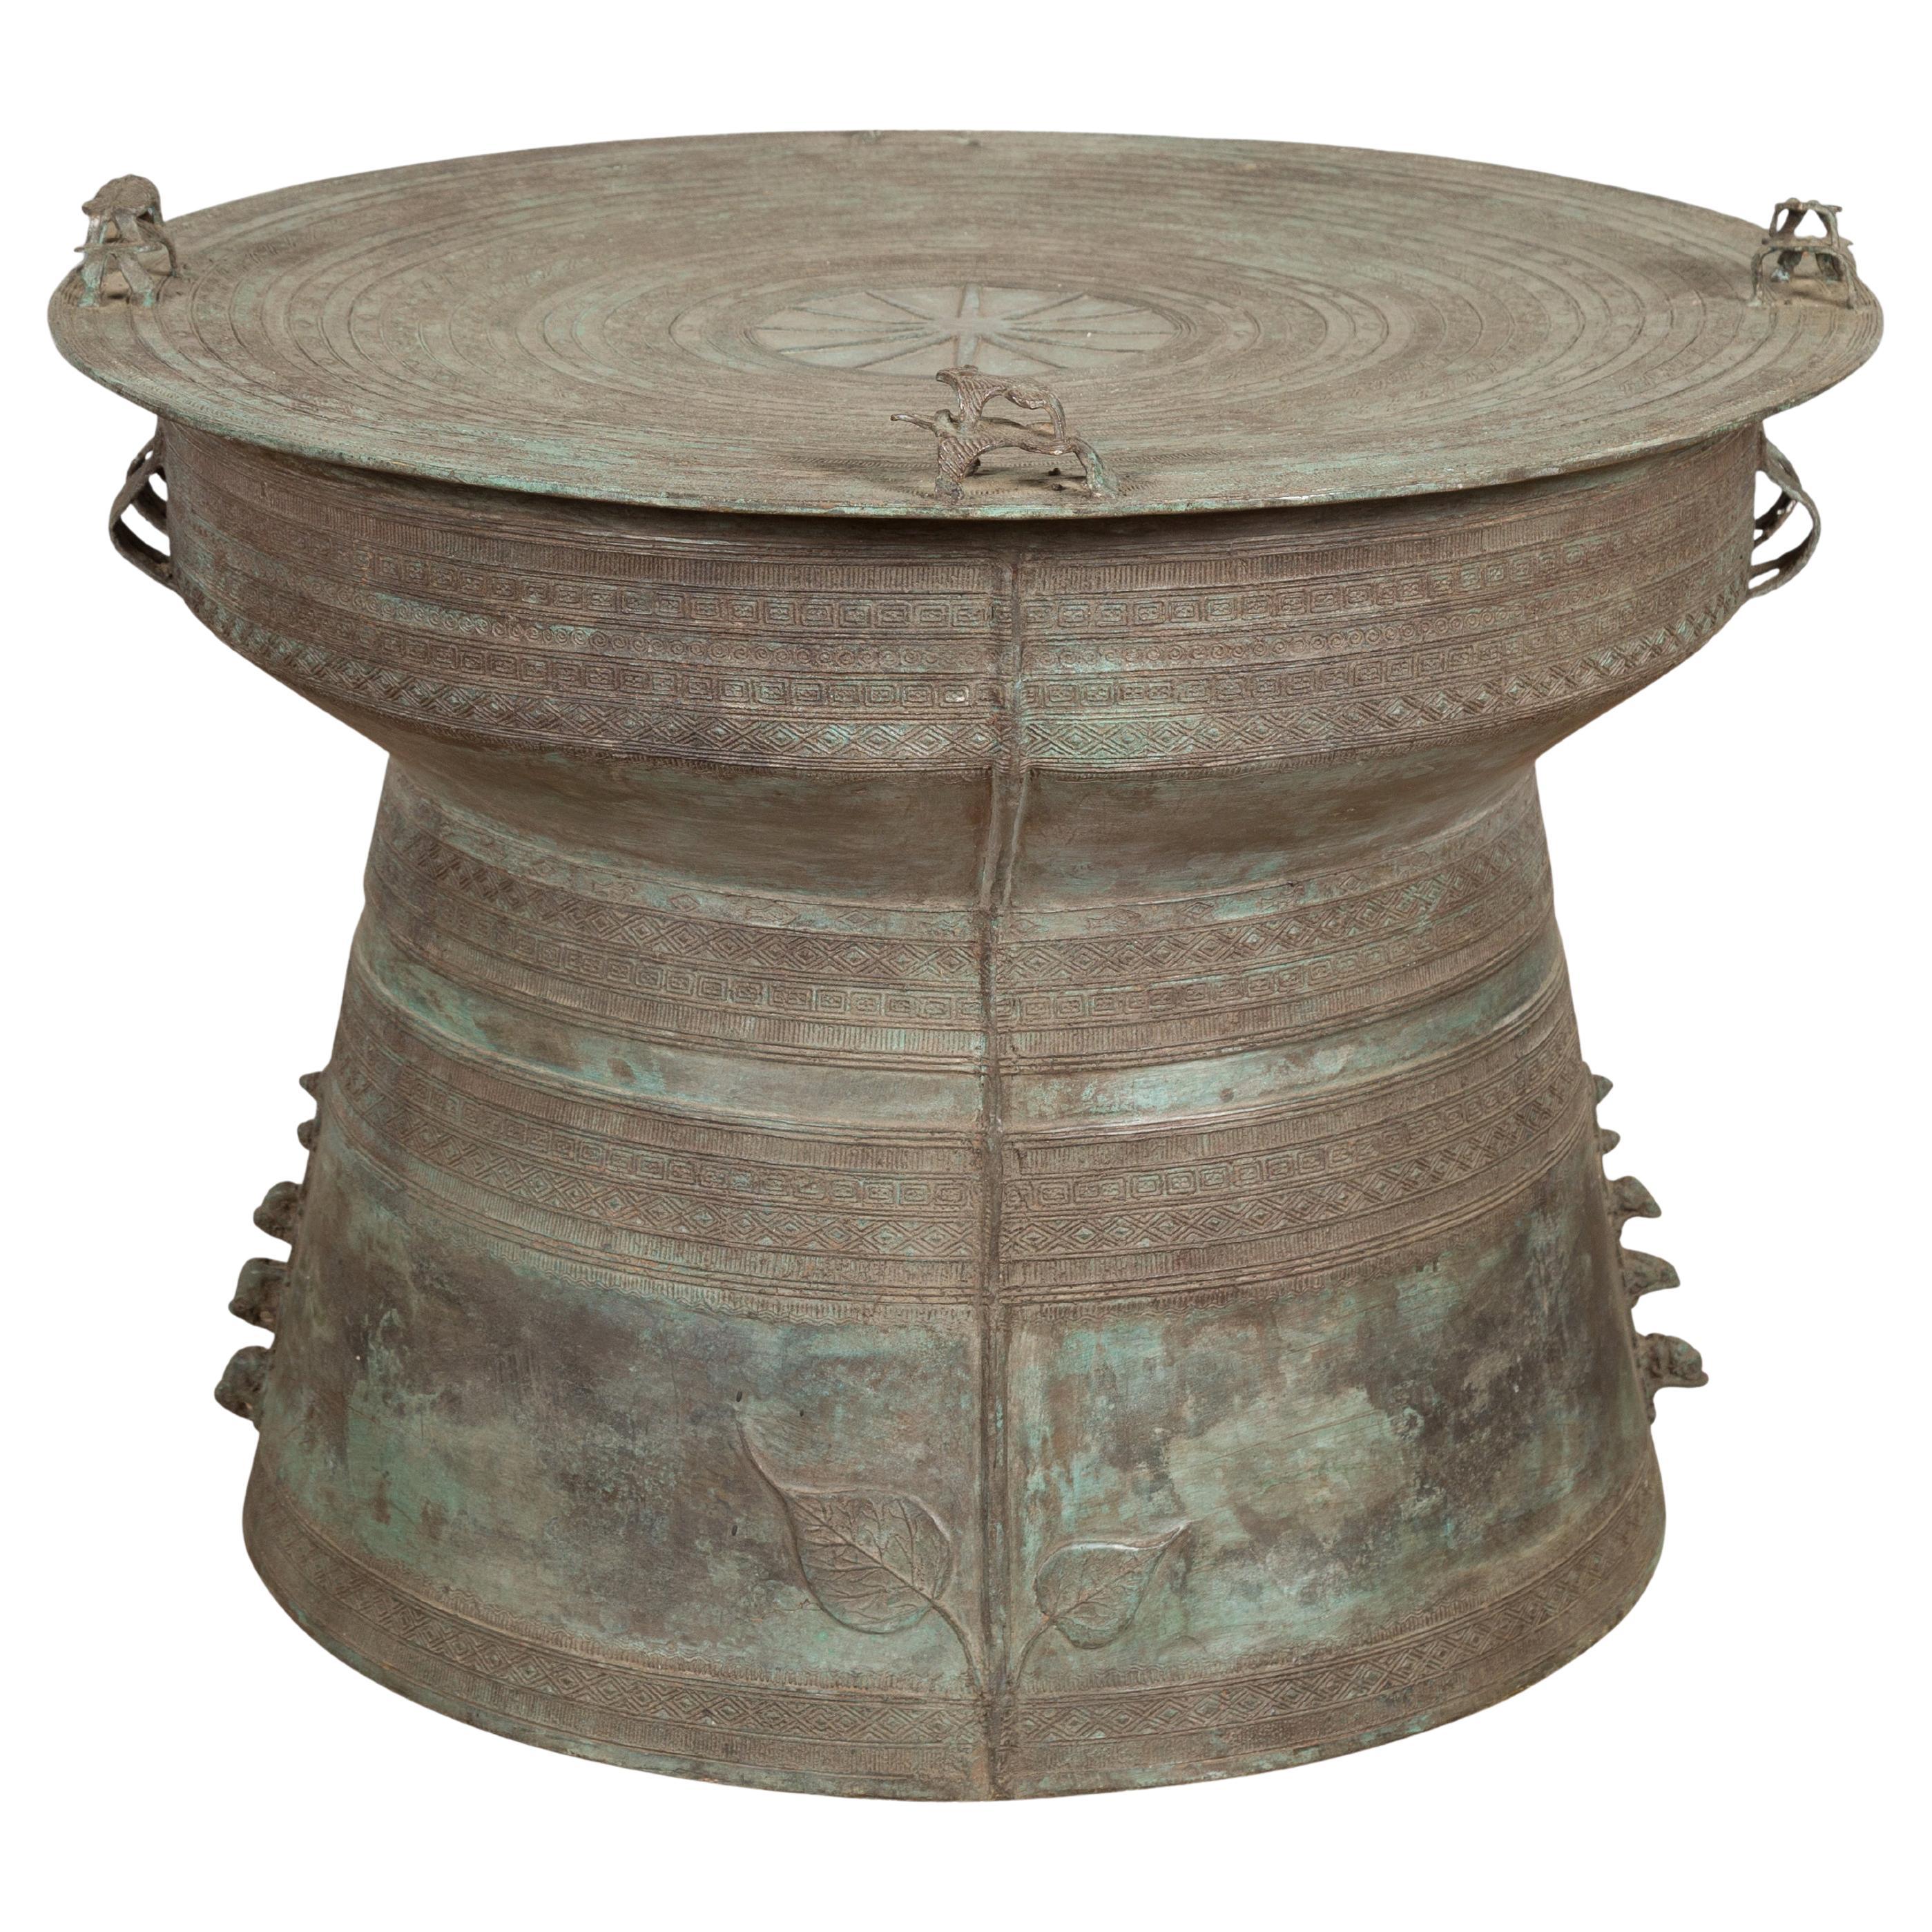 Laotian Style Vintage Bronze Rain Drum with Geometric Motifs and Frog Finials